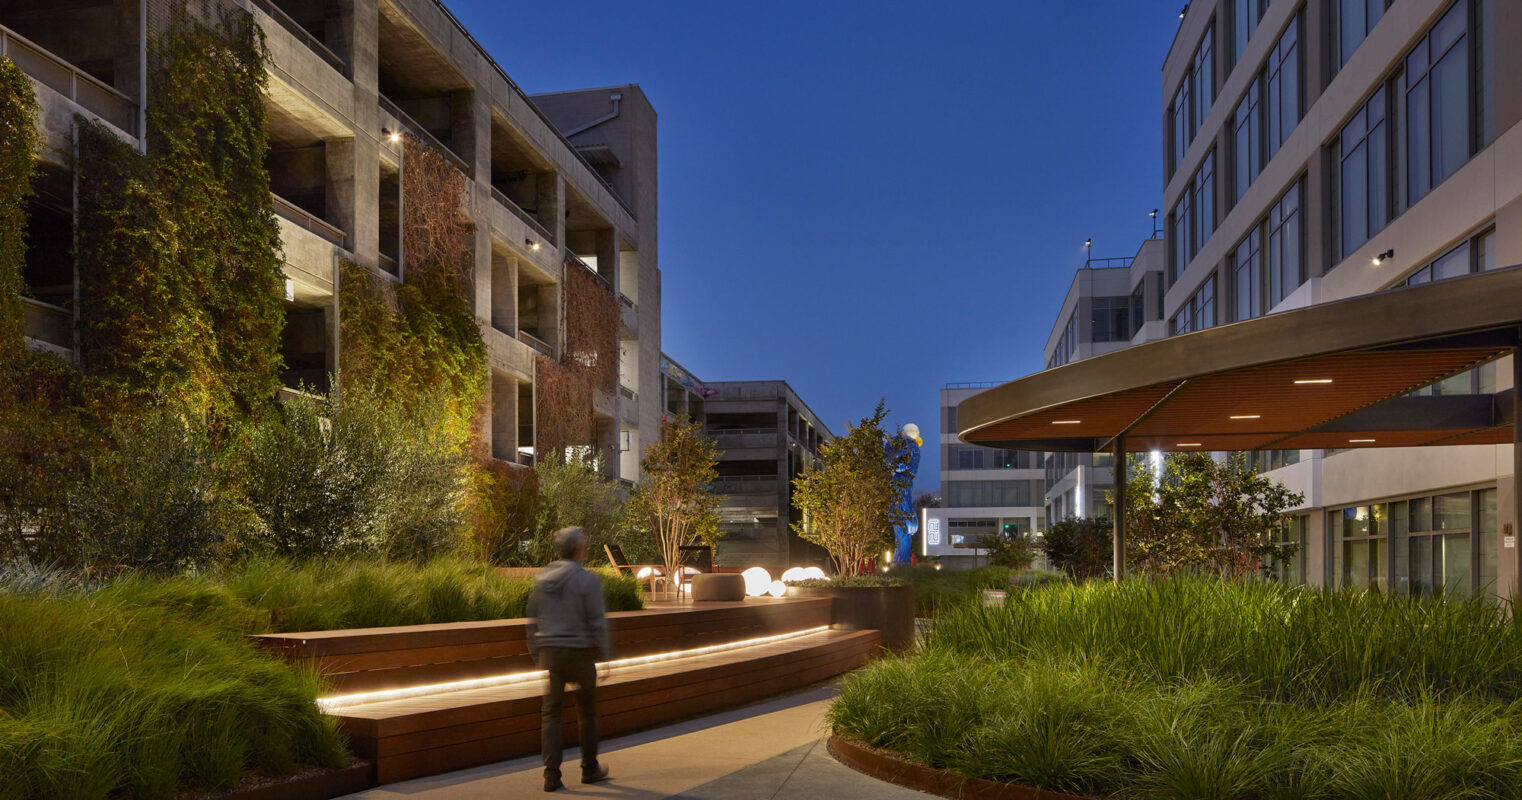 Evening view of a modern urban courtyard with integrated landscaping. Features include stepped wooden planters, ambient lighting, and contemporary outdoor seating. Industrial-style buildings flank the space, enhancing the blend of natural and architectural design.